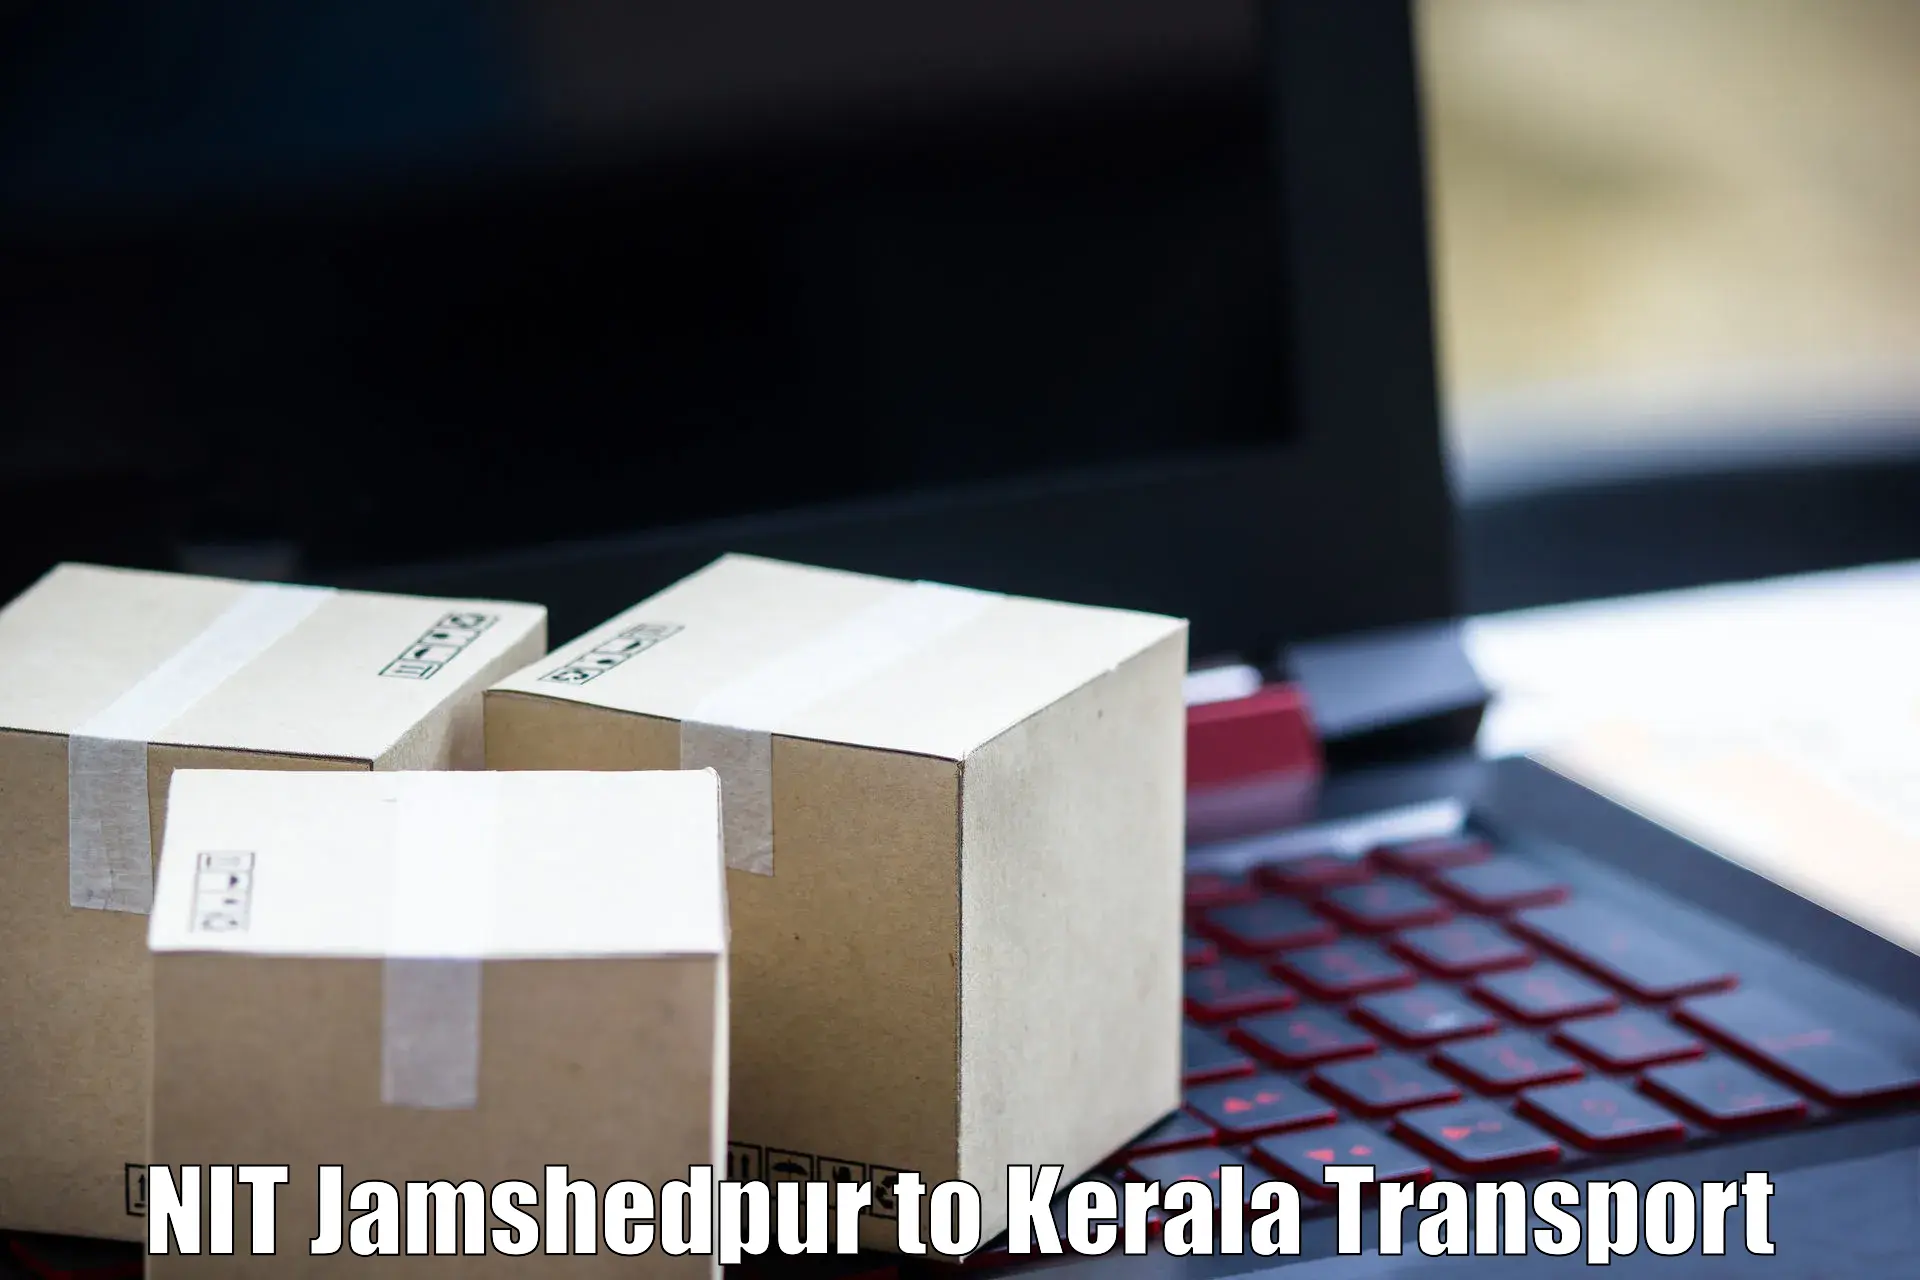 Road transport online services NIT Jamshedpur to Alappuzha